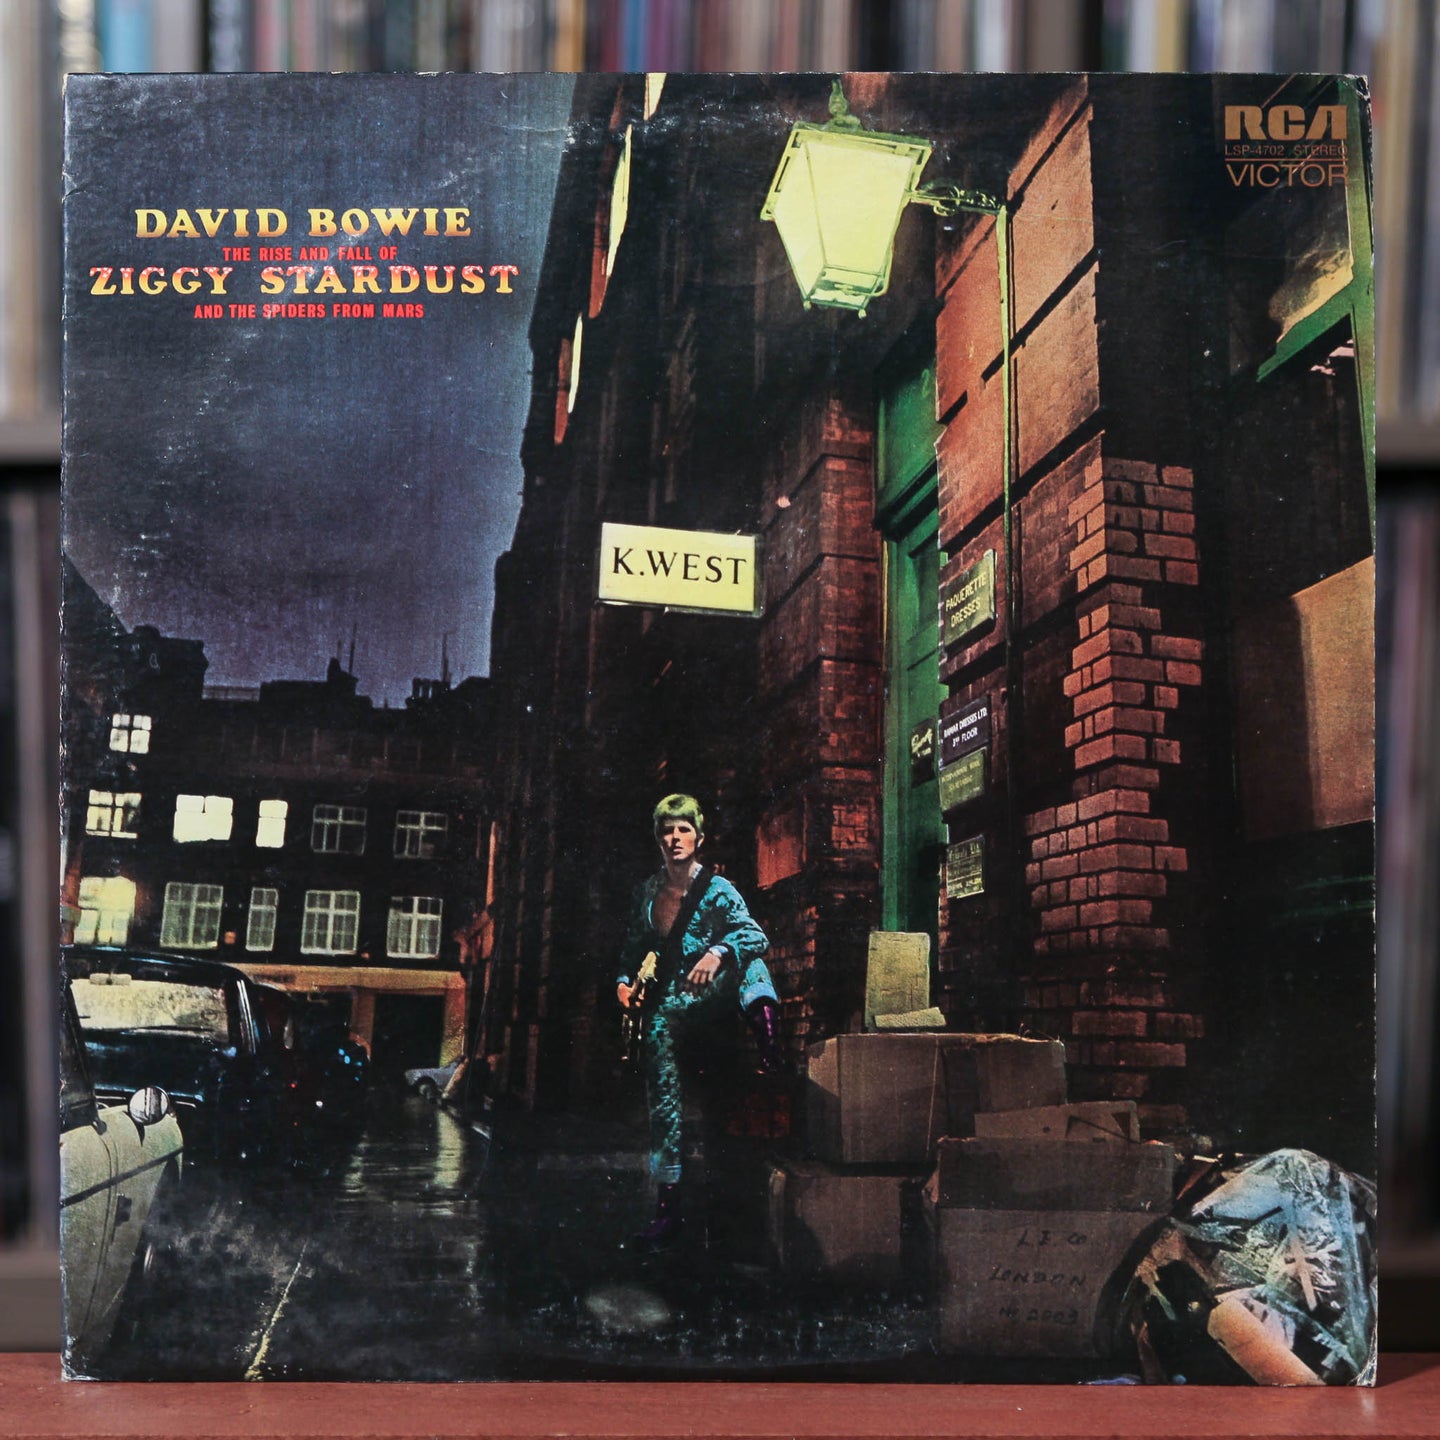 David Bowie - The Rise And Fall Of Ziggy Stardust And The Spiders From Mars - 1975 RCA, VG+/EX